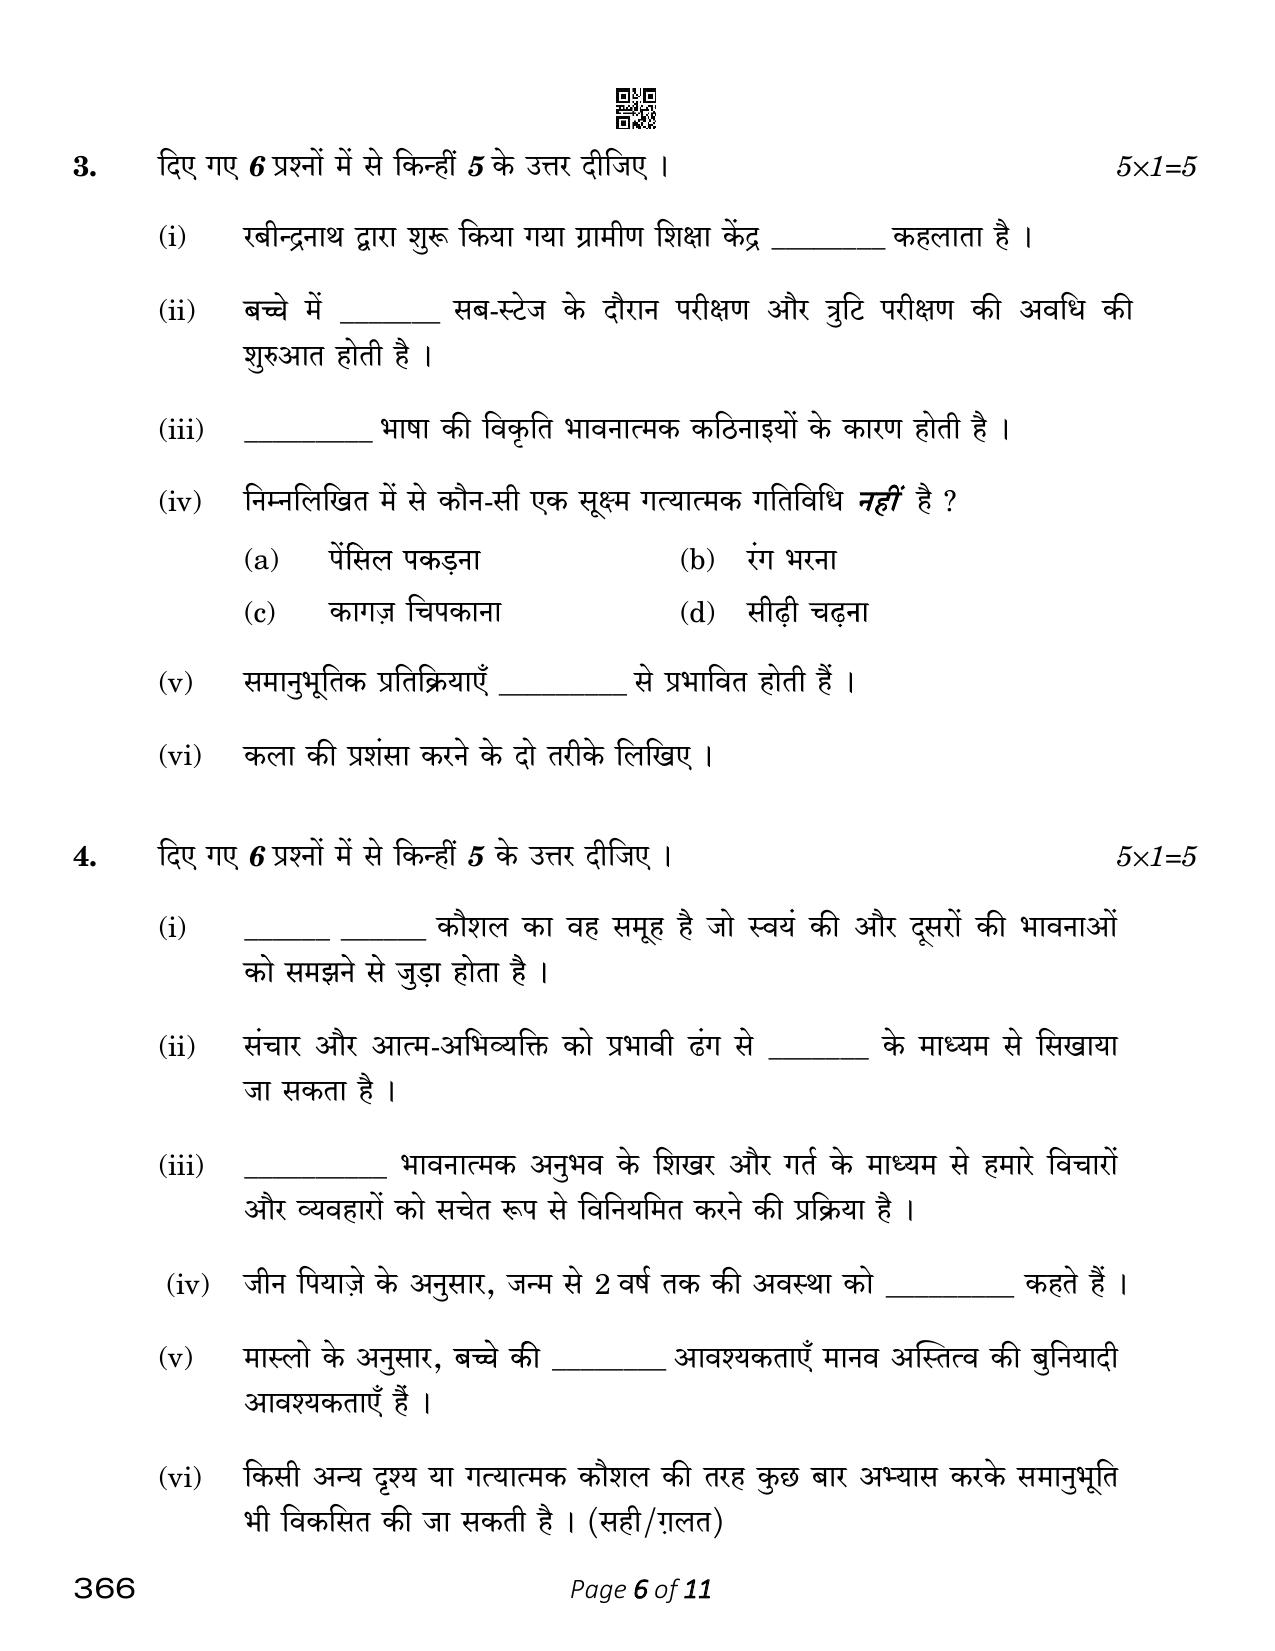 CBSE Class 12 Early Childhood Care & Education (Compartment) 2023 Question Paper - Page 6